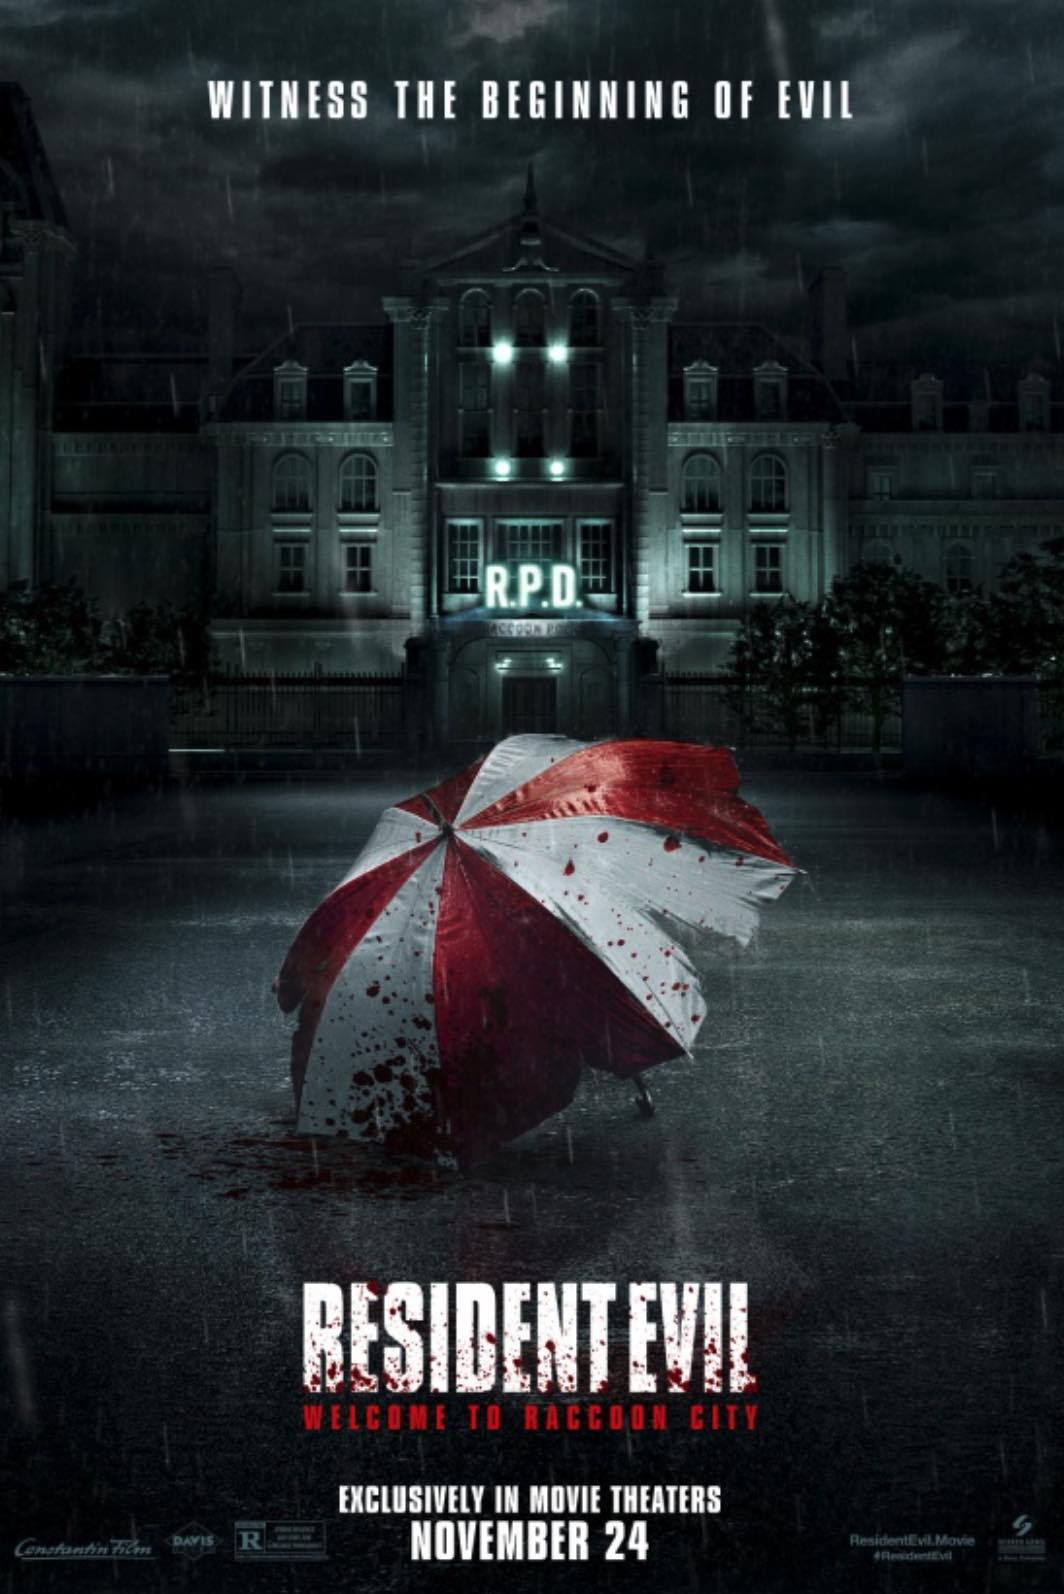 'RESIDENT EVIL: WELCOME TO RACCOON CITY' core news picture